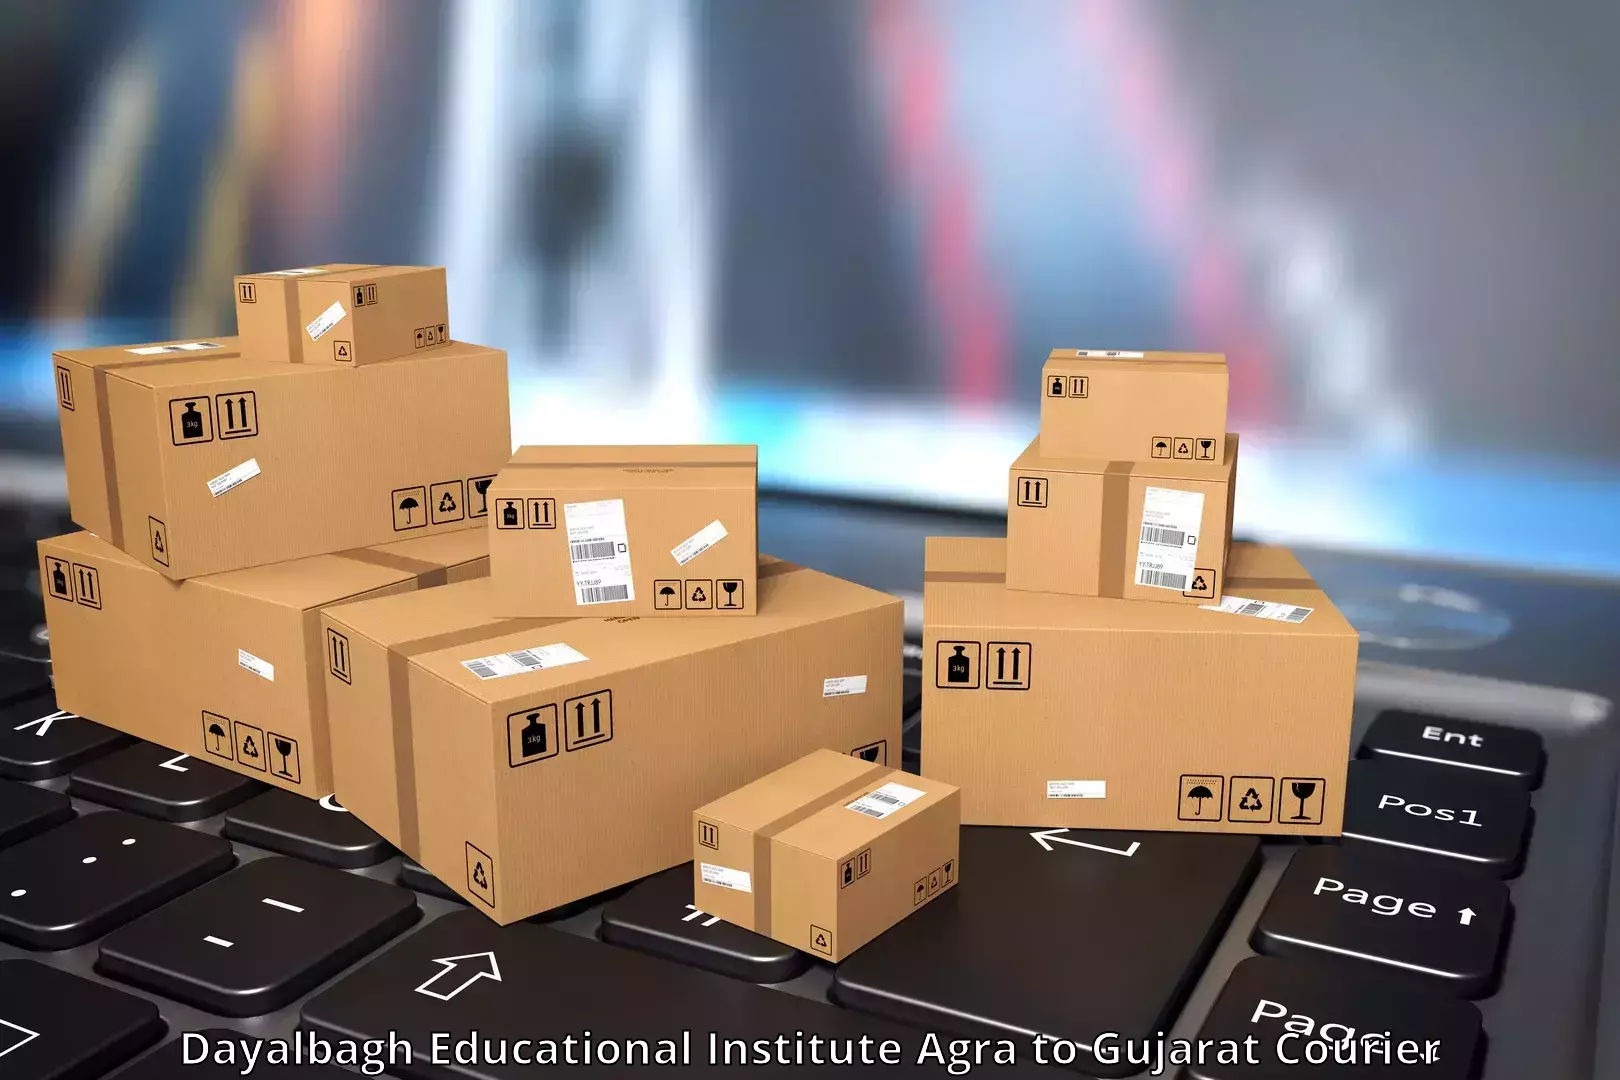 Affordable shipping solutions Dayalbagh Educational Institute Agra to Gujarat